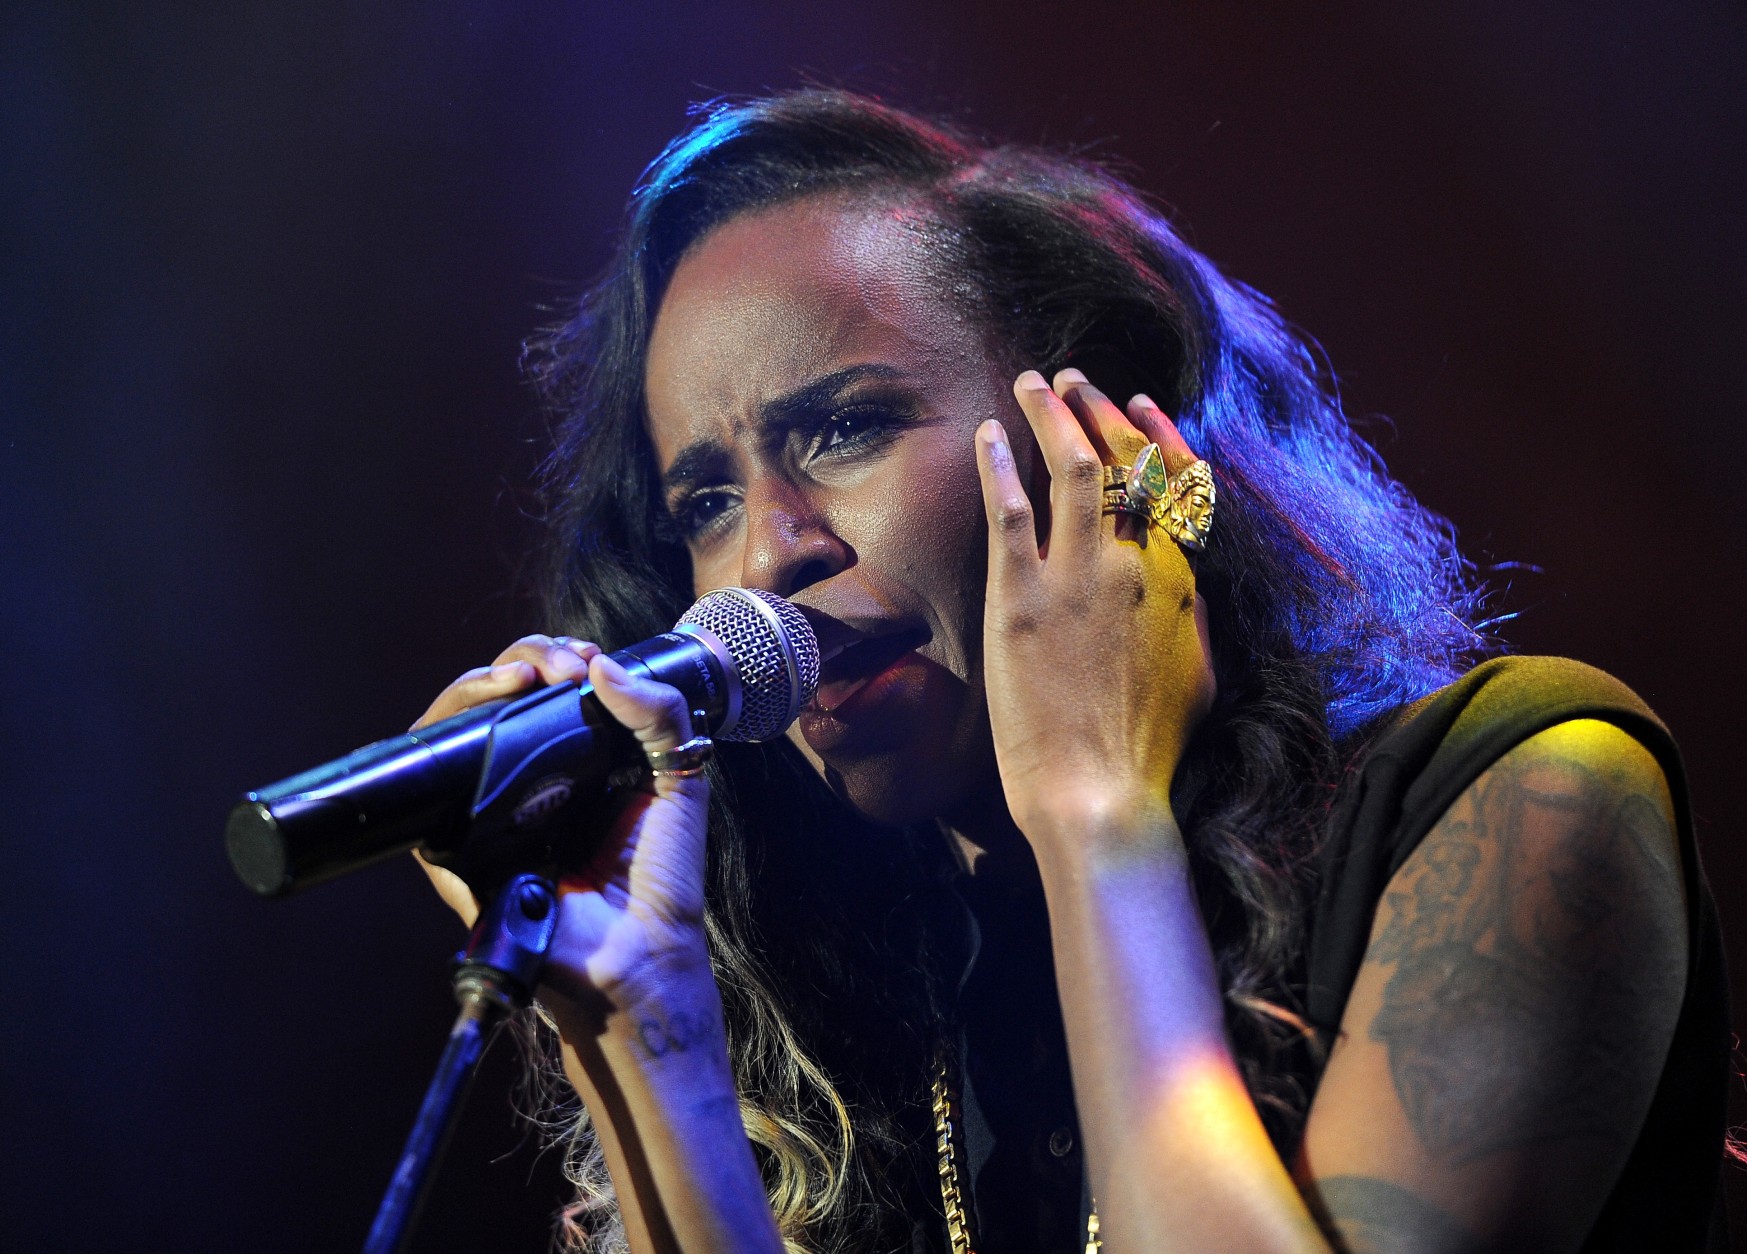 Angel Haze performs at the ELLE 5th annual Women In Music concert celebration at the Avalon Hollywood on Tuesday, April 22, 2014, in Los Angeles (Photo by Chris Pizzello/Invision/AP)